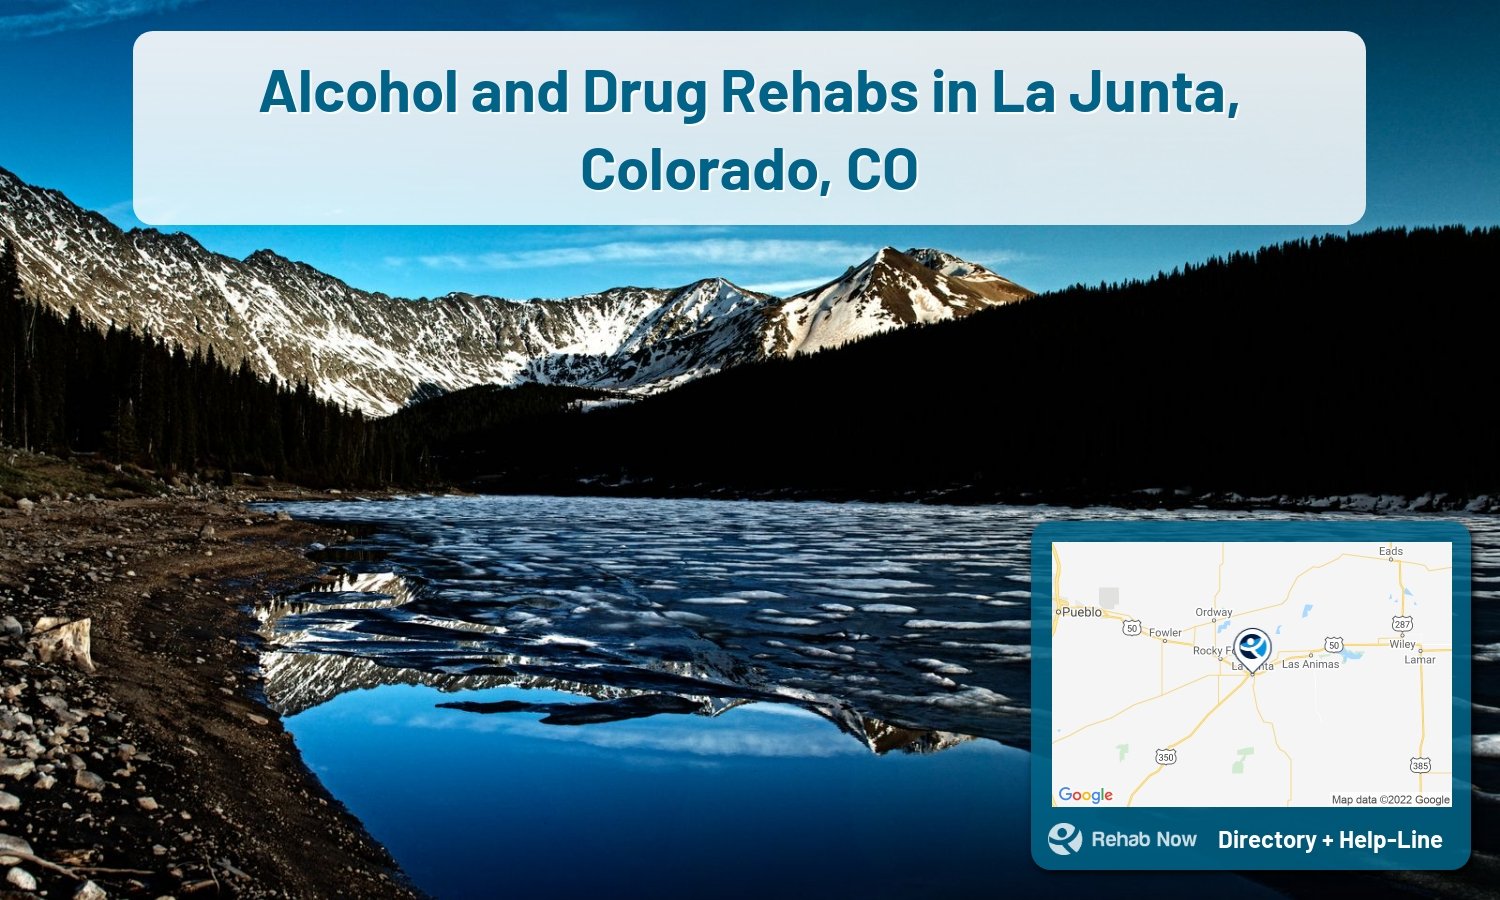 Ready to pick a rehab center in La Junta? Get off alcohol, opiates, and other drugs, by selecting top drug rehab centers in Colorado